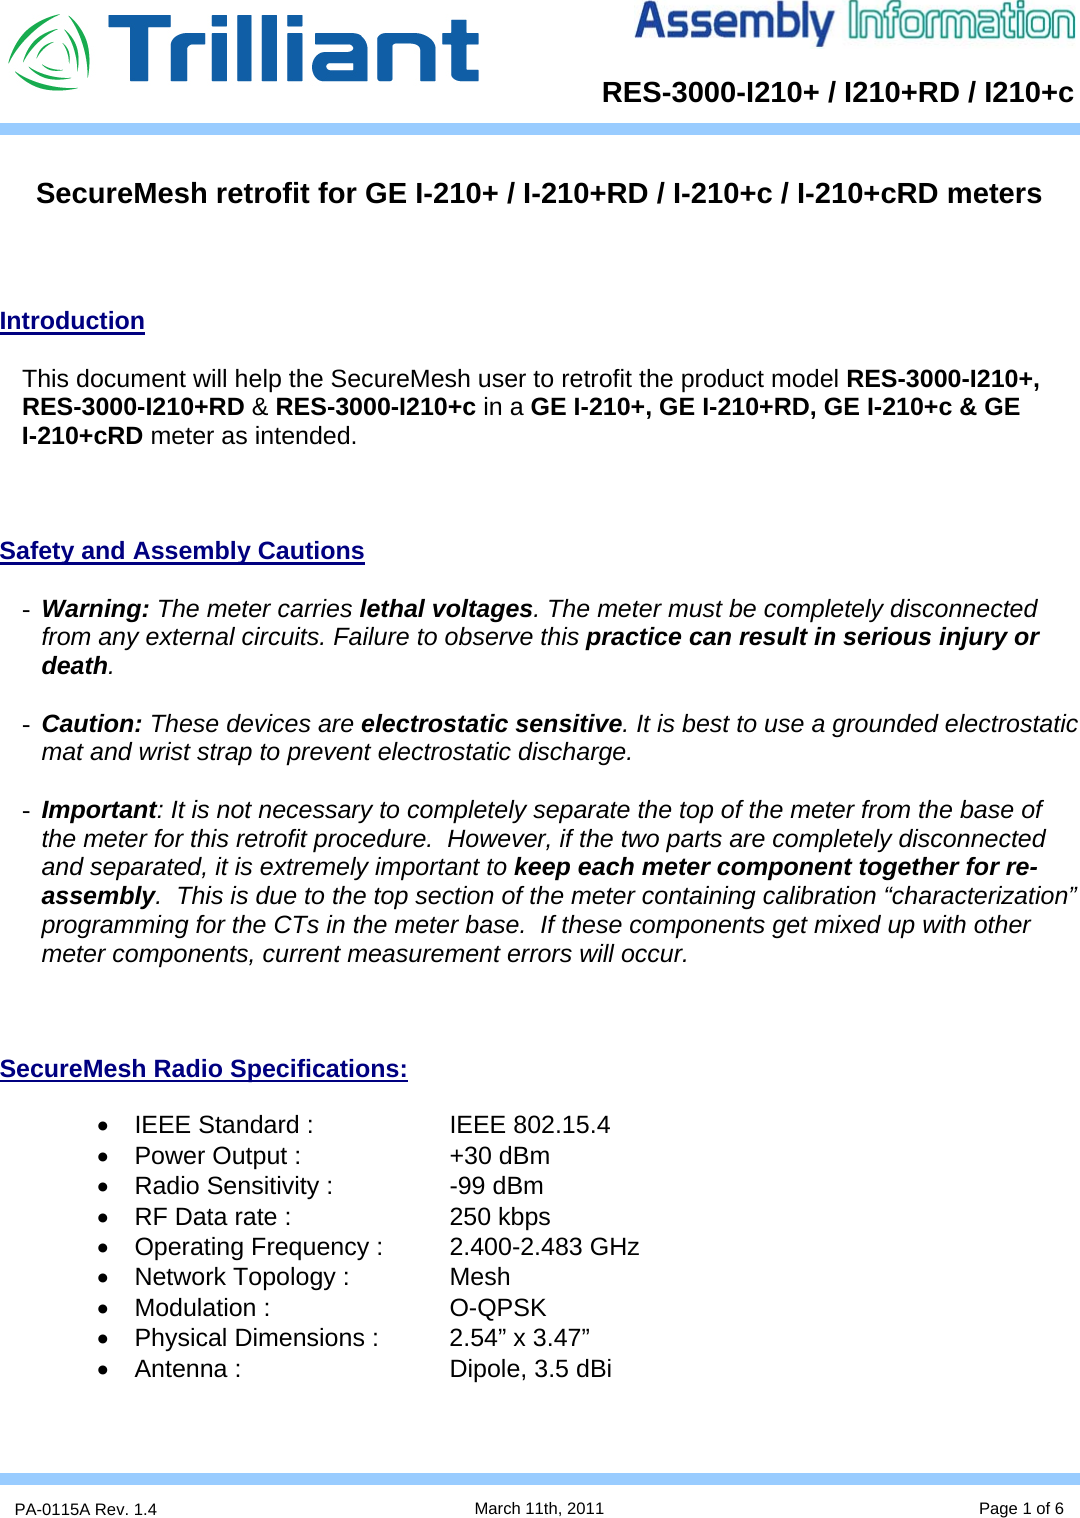      RES-3000-I210+ / I210+RD / I210+cPA-0115A Rev. 1.4  March 11th, 2011 Page 1 of 6    Introduction  This document will help the SecureMesh user to retrofit the product model RES-3000-I210+,  RES-3000-I210+RD &amp; RES-3000-I210+c in a GE I-210+, GE I-210+RD, GE I-210+c &amp; GE       I-210+cRD meter as intended.    Safety and Assembly Cautions  - Warning: The meter carries lethal voltages. The meter must be completely disconnected from any external circuits. Failure to observe this practice can result in serious injury or death.  - Caution: These devices are electrostatic sensitive. It is best to use a grounded electrostatic mat and wrist strap to prevent electrostatic discharge.  - Important: It is not necessary to completely separate the top of the meter from the base of the meter for this retrofit procedure.  However, if the two parts are completely disconnected and separated, it is extremely important to keep each meter component together for re-assembly.  This is due to the top section of the meter containing calibration “characterization” programming for the CTs in the meter base.  If these components get mixed up with other meter components, current measurement errors will occur.    SecureMesh Radio Specifications:  •  IEEE Standard :    IEEE 802.15.4 •  Power Output :    +30 dBm •  Radio Sensitivity :    -99 dBm •  RF Data rate :     250 kbps •  Operating Frequency :  2.400-2.483 GHz •  Network Topology :    Mesh • Modulation :   O-QPSK •  Physical Dimensions :  2.54” x 3.47” •  Antenna :      Dipole, 3.5 dBi    SecureMesh retrofit for GE I-210+ / I-210+RD / I-210+c / I-210+cRD meters 